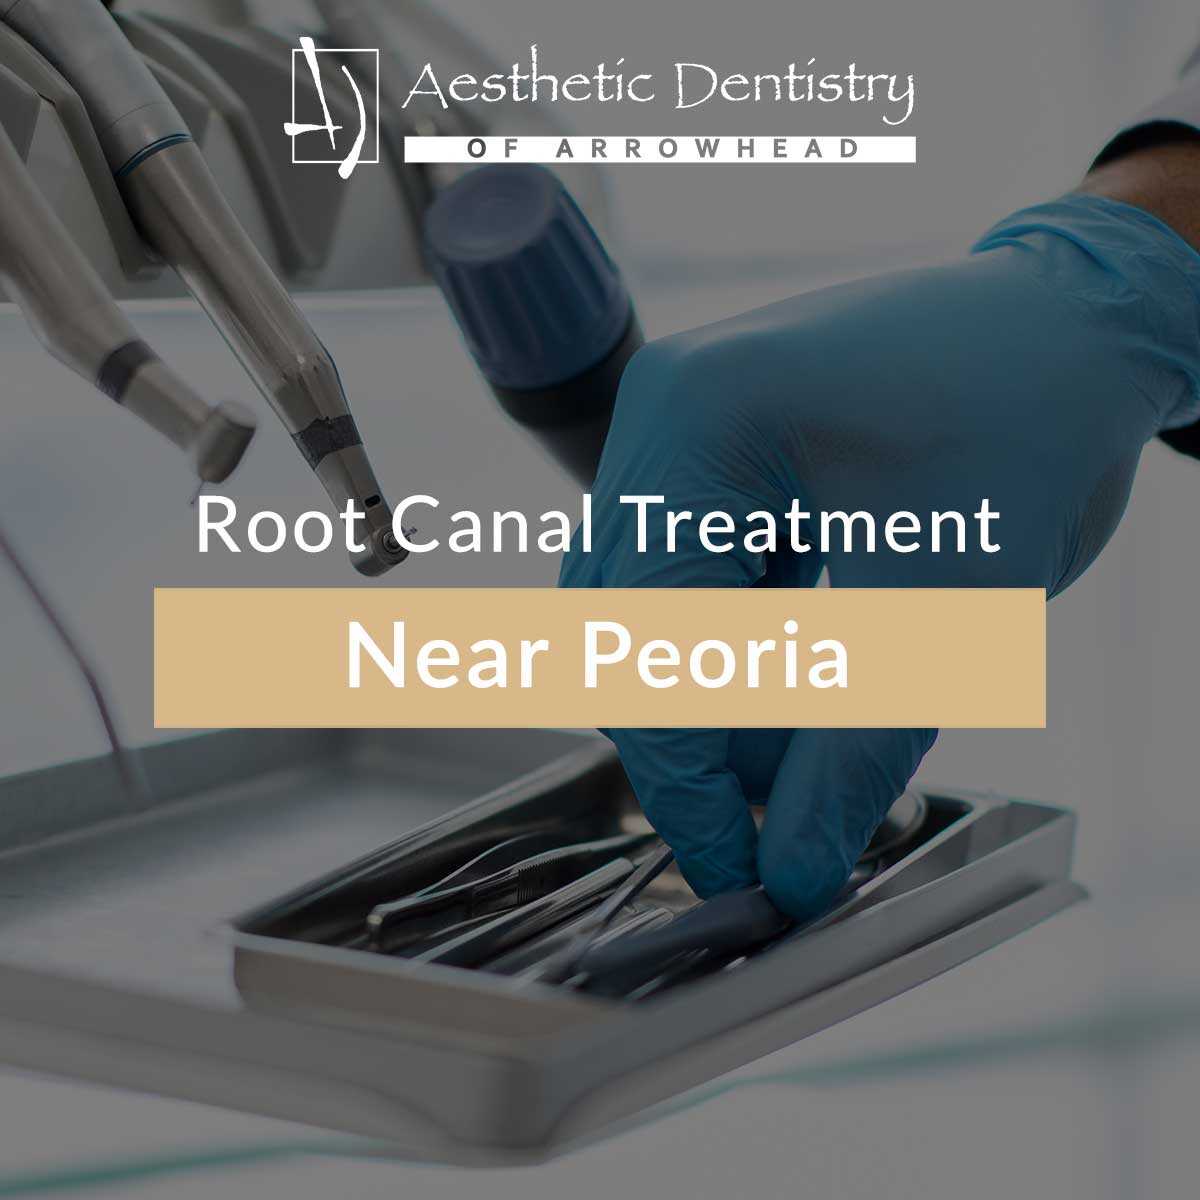 Root Canal Treatment Near Peoria featured image